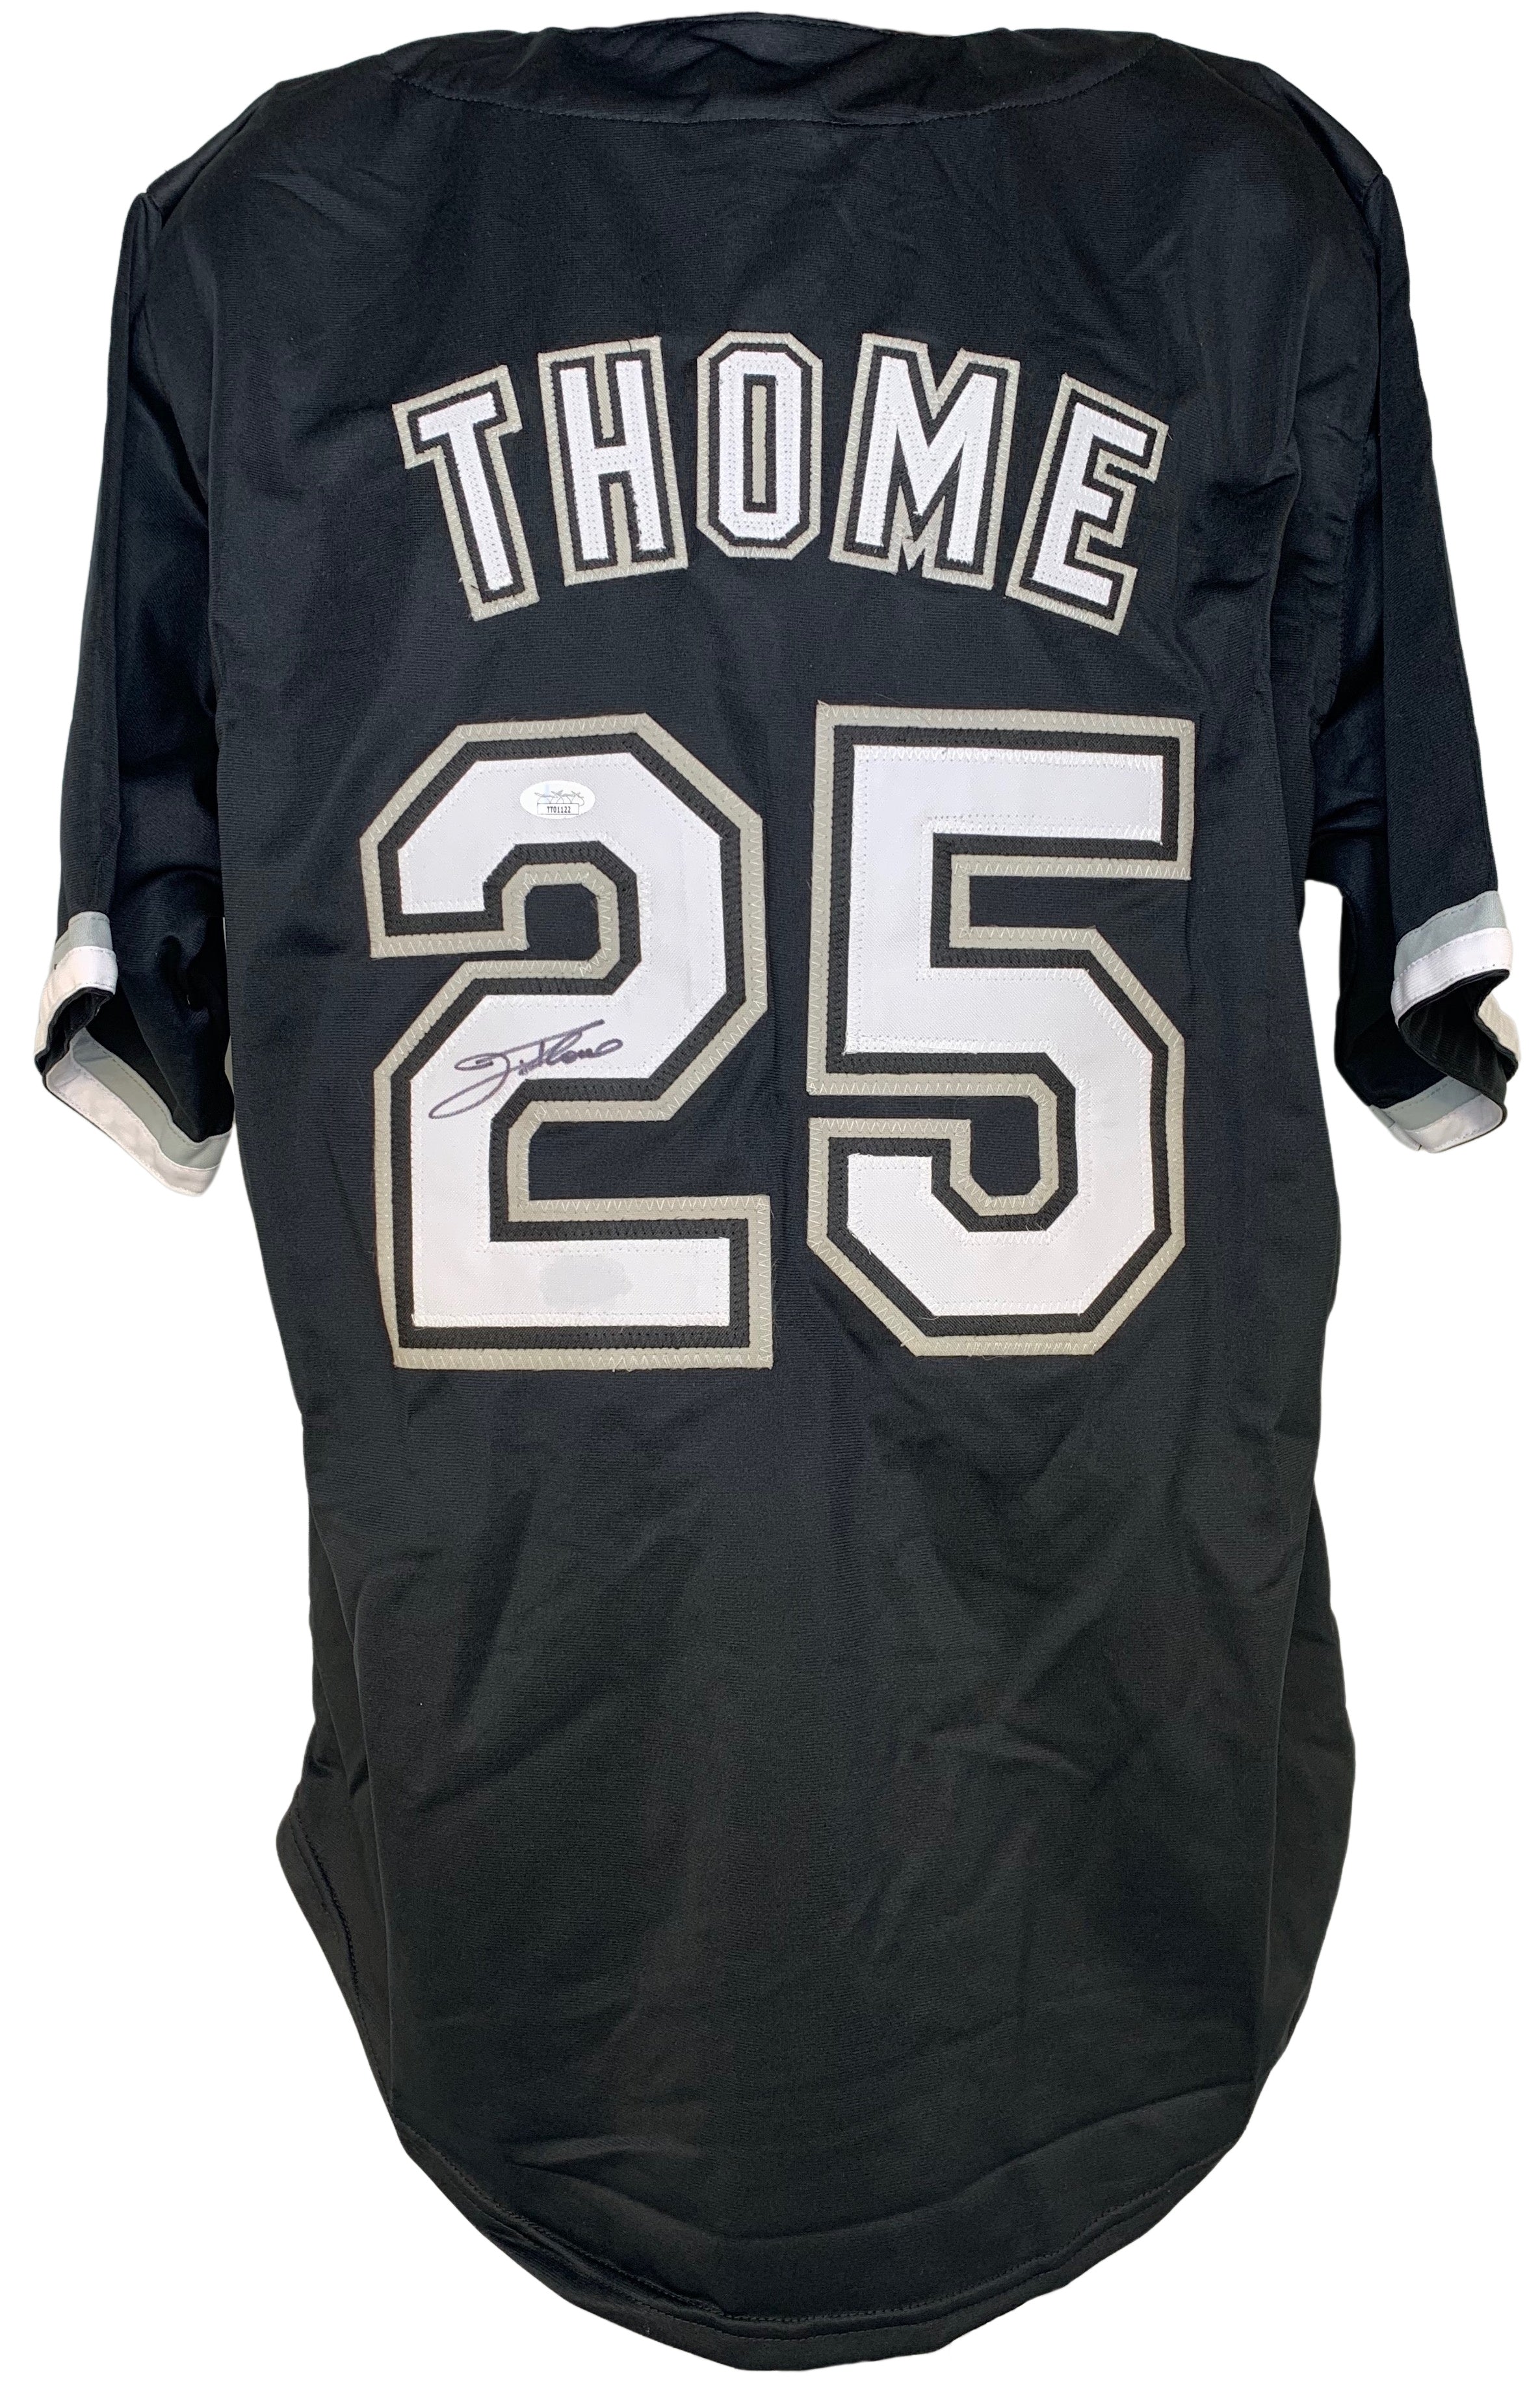 Jim Thome autographed signed jersey MLB Chicago White Sox JSA COA